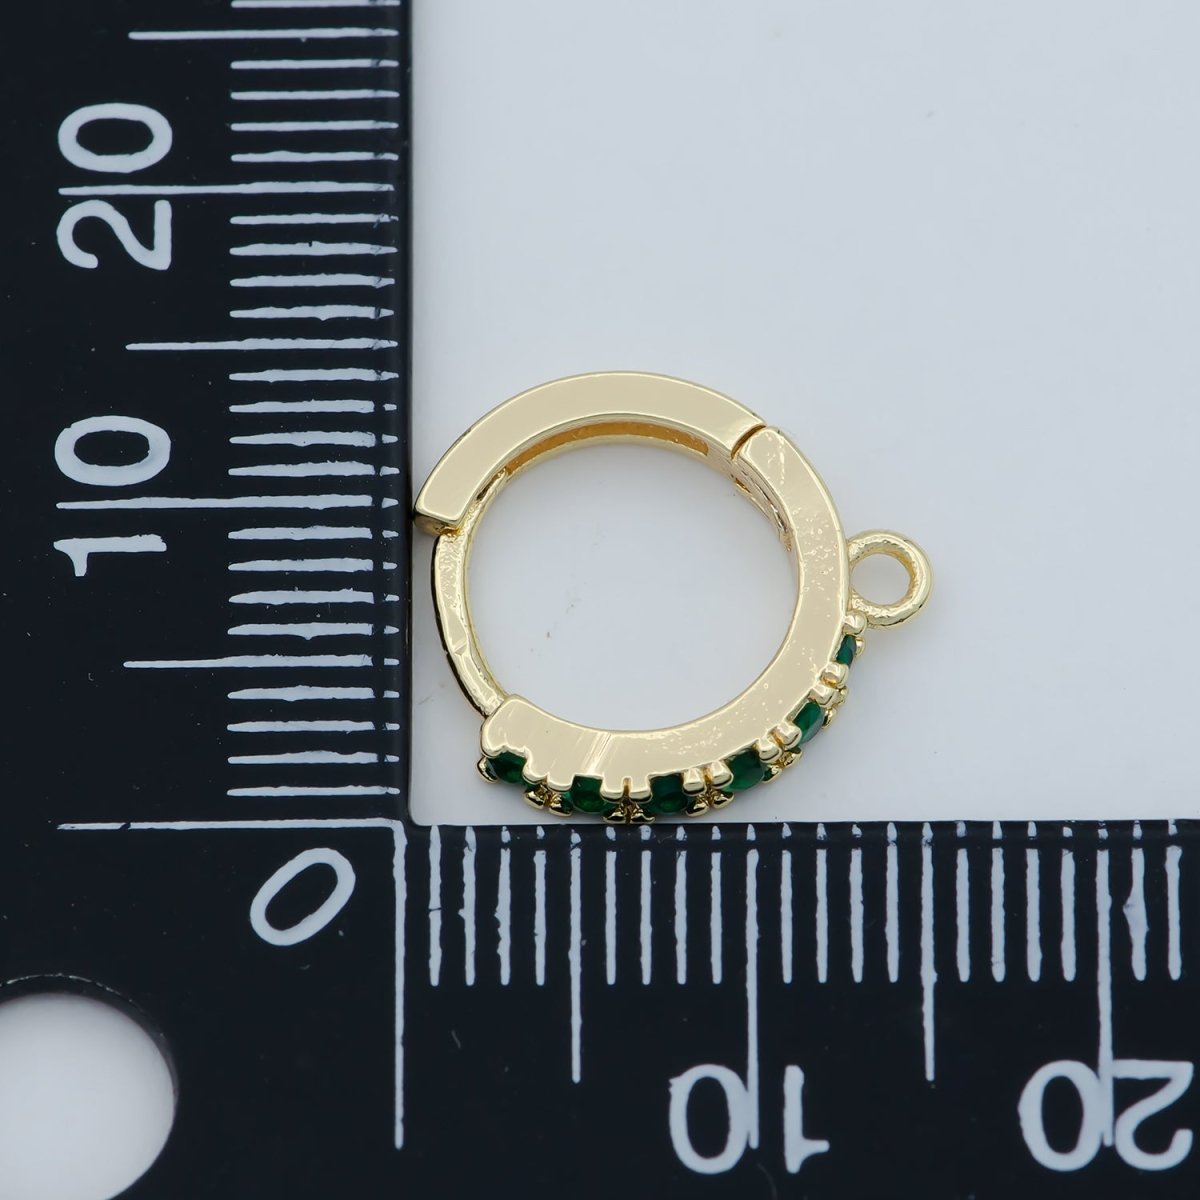 18K Emerald Green Gold Filled Round Huggies Earring Supplies Open Link earring For DIY Jewelry Making Earring Making L-390 - DLUXCA